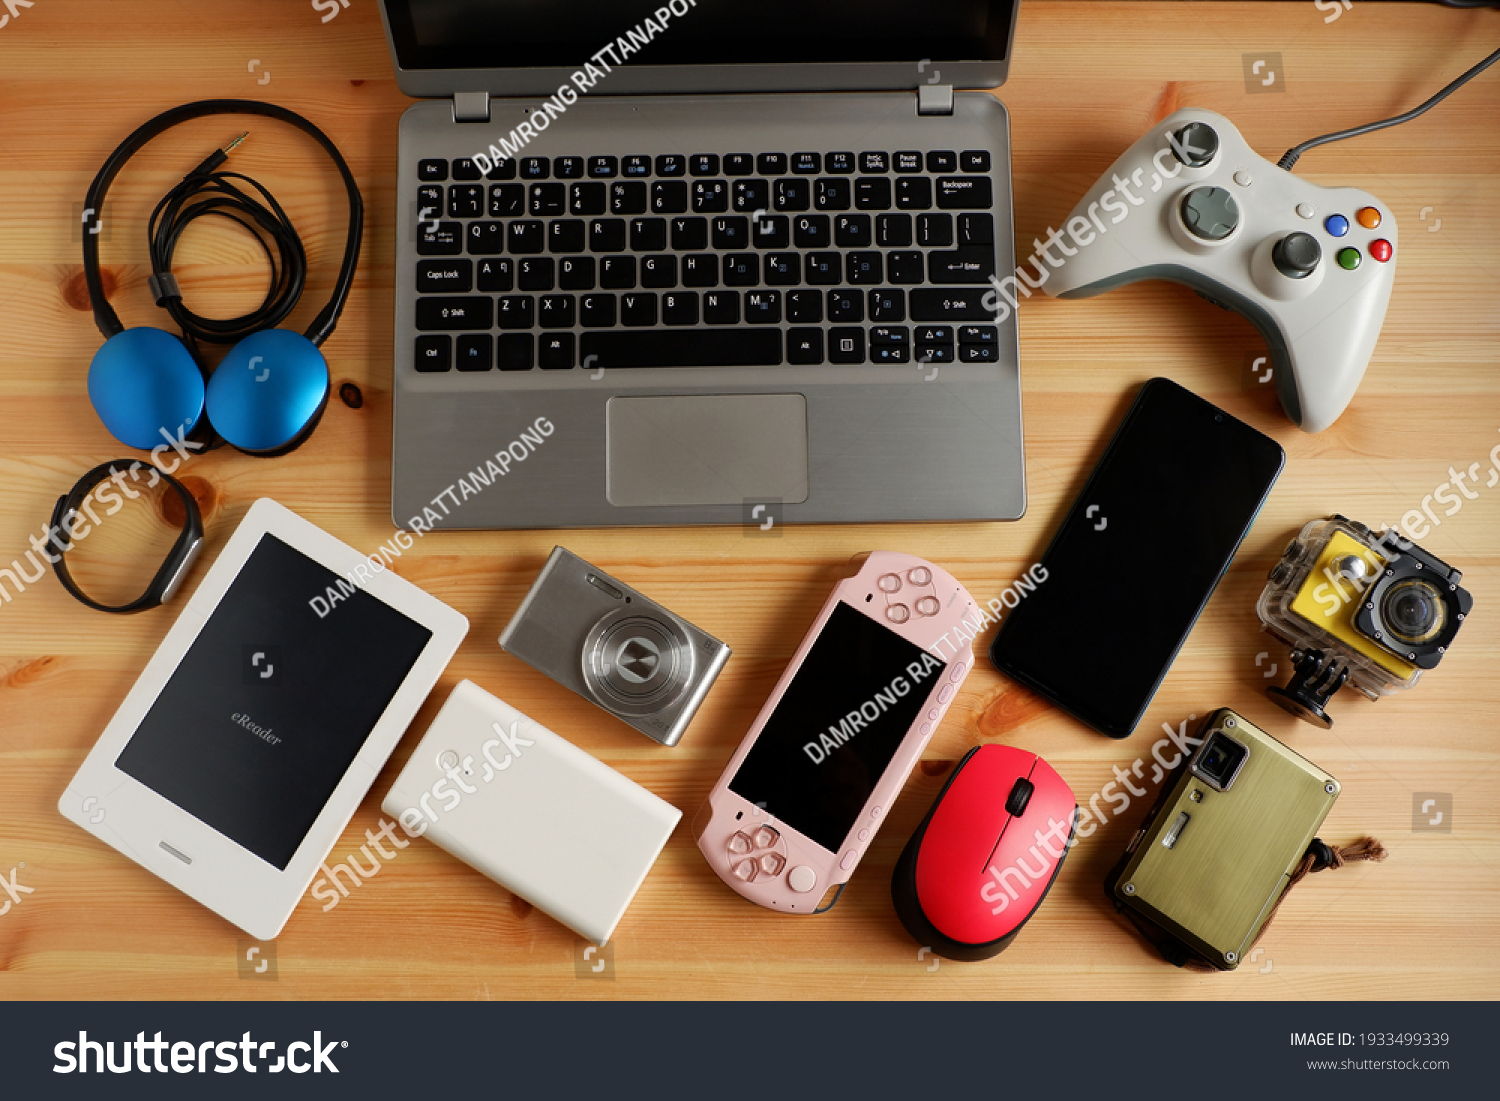 laptop computer with Smartphone and portable game consoles and ebook reader and many electronic gadgets on wooden background.Top view. #1933499339